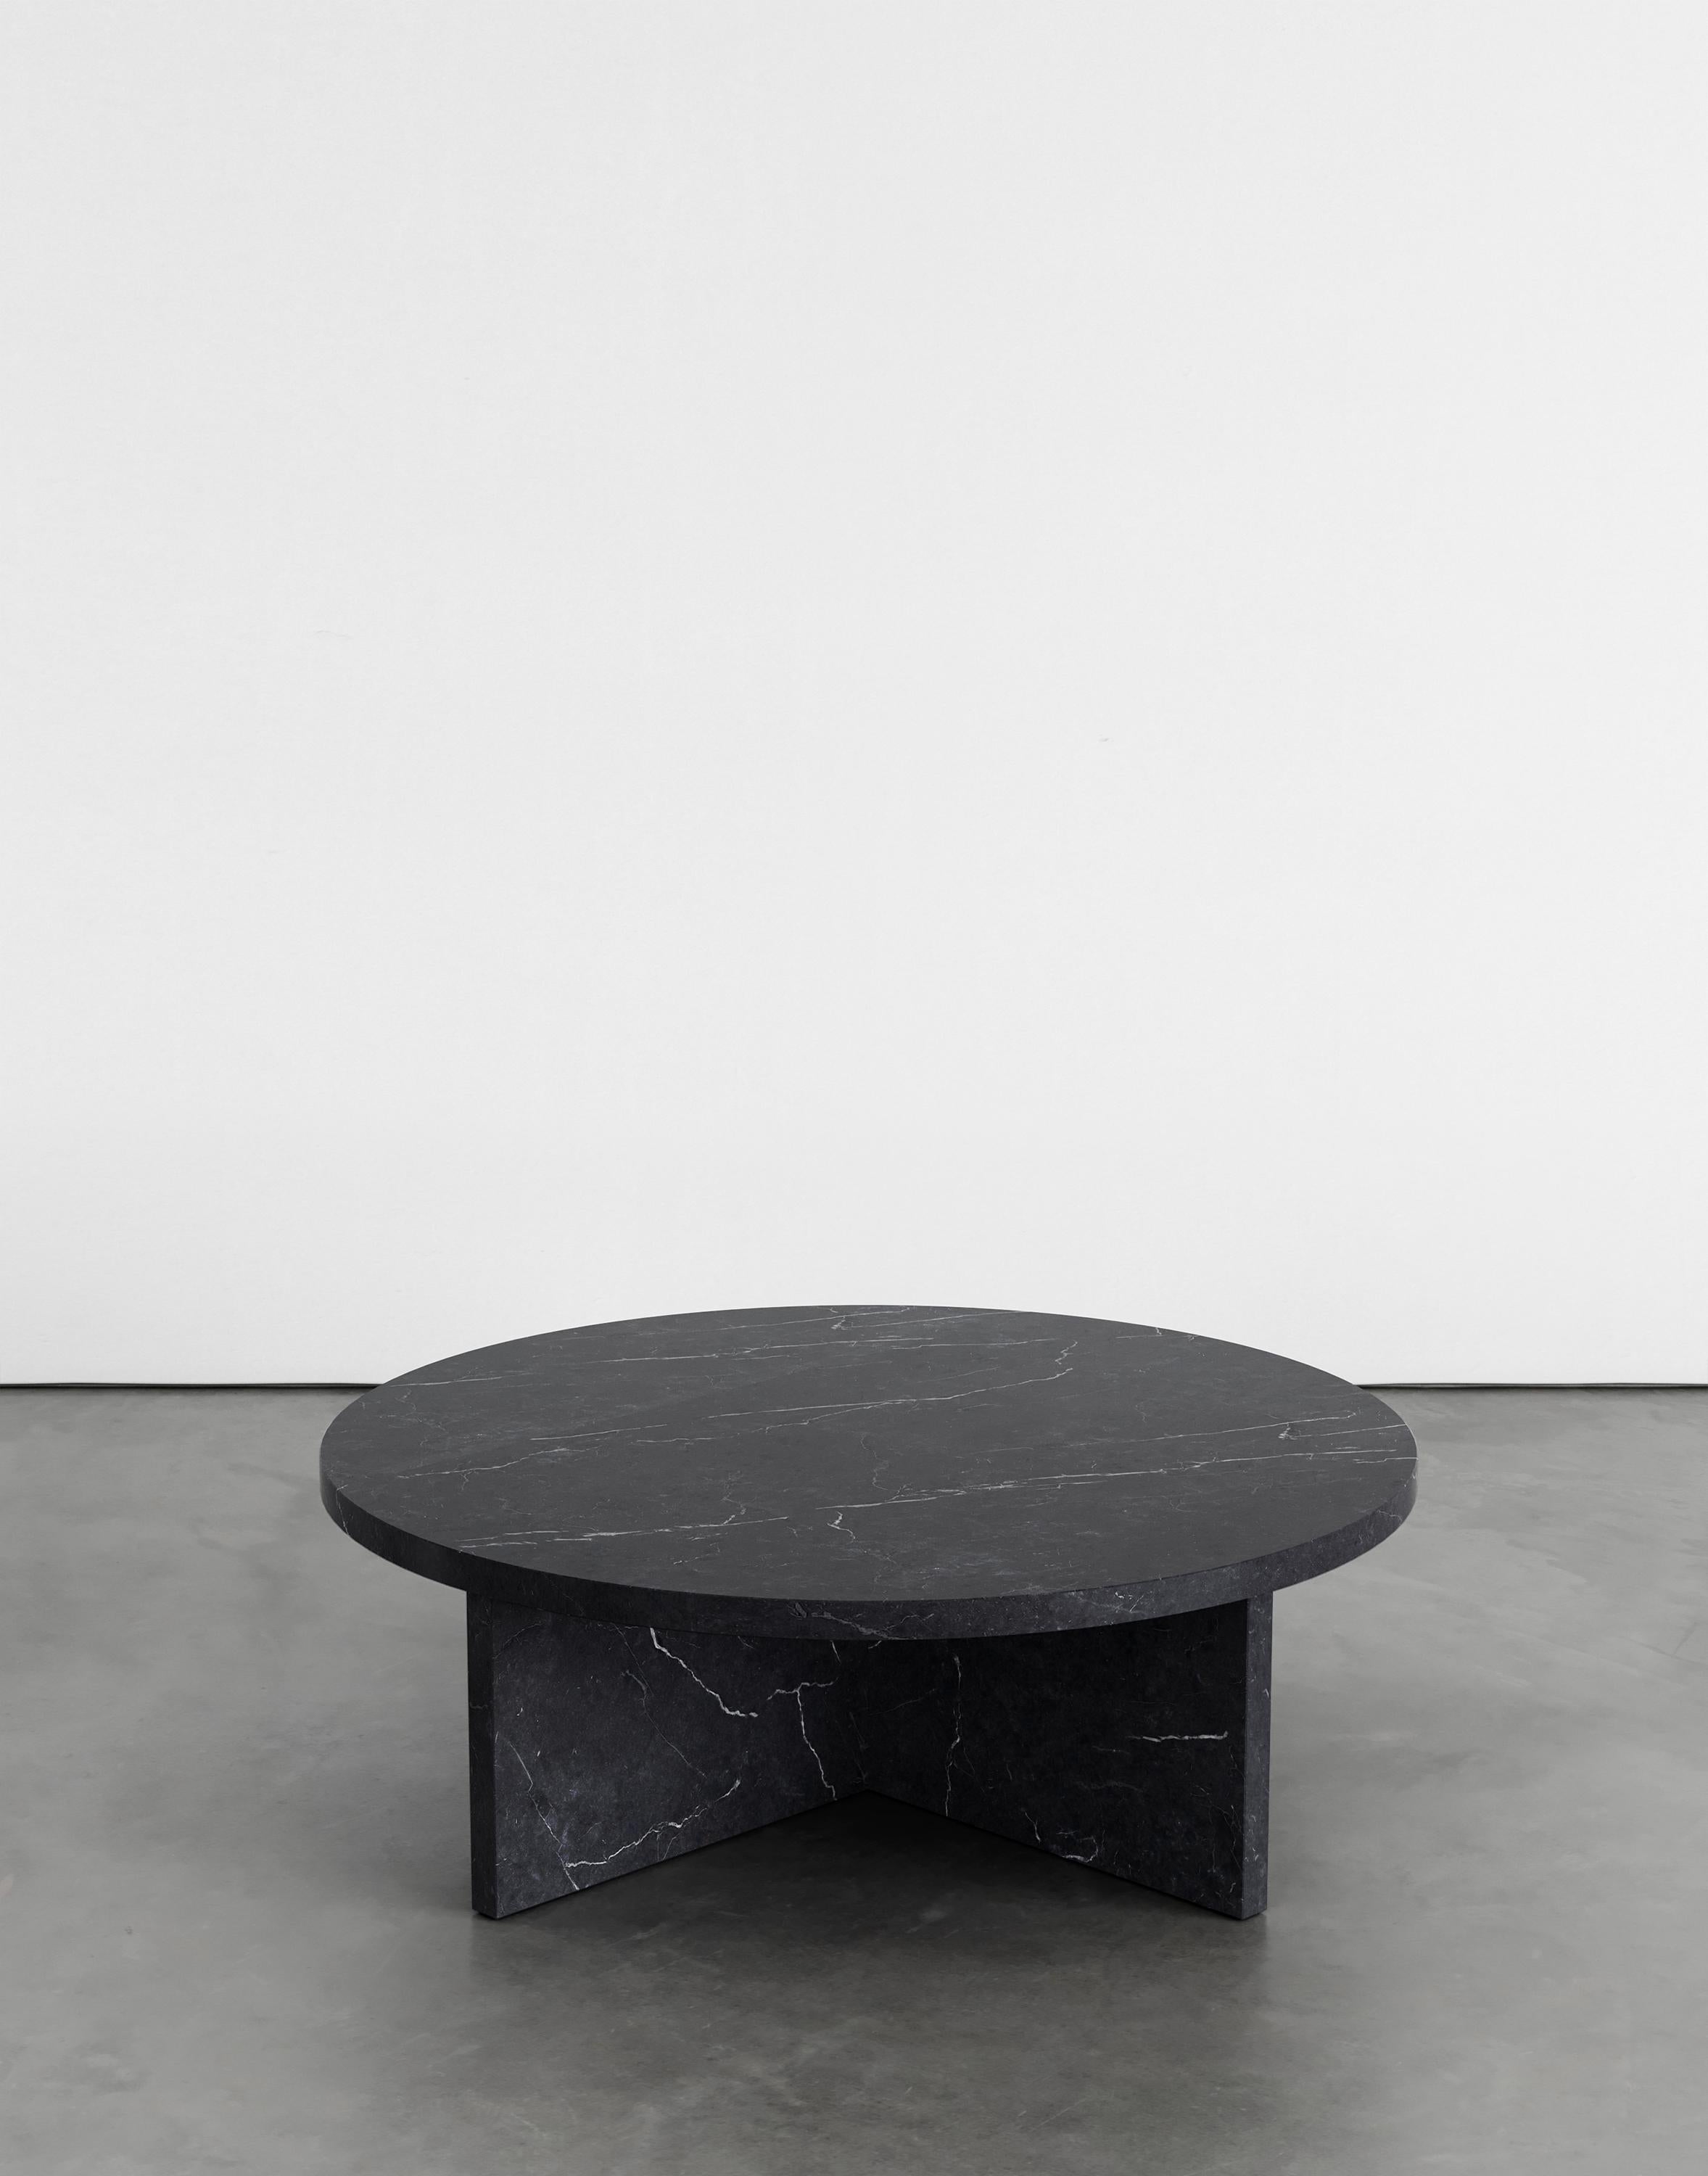 Rosa 90 coffee table by Agglomerati 
Dimensions: W 90 x H 30 cm 
Materials: Black Marquina. Available in other stones. 

Agglomerati is a London-based studio creating distinctive stone furniture. Established in 2019 by Australian designer Sam